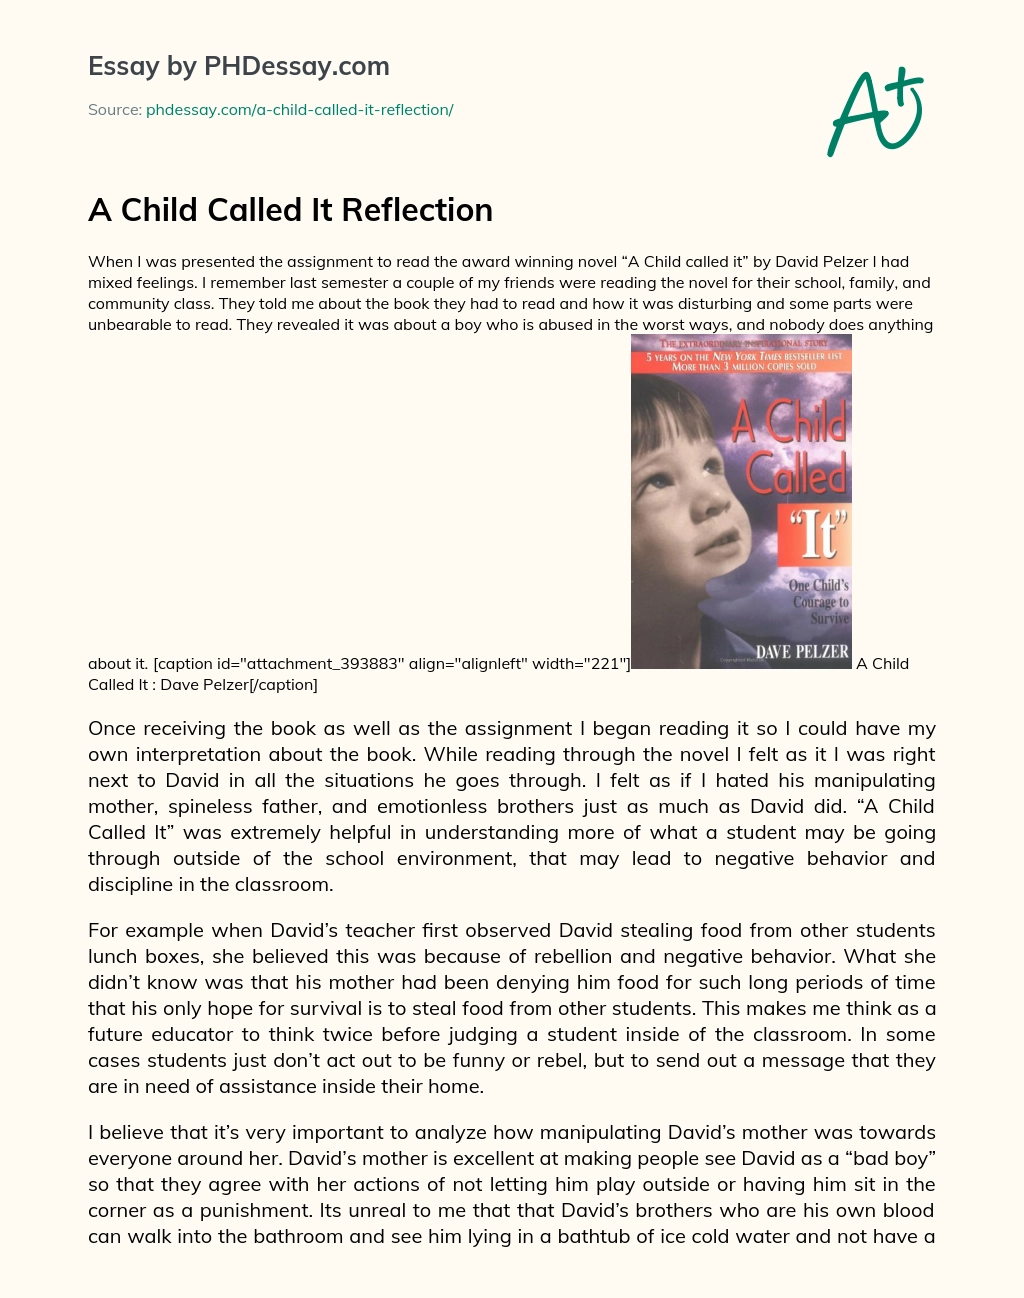 A Child Called It Reflection essay